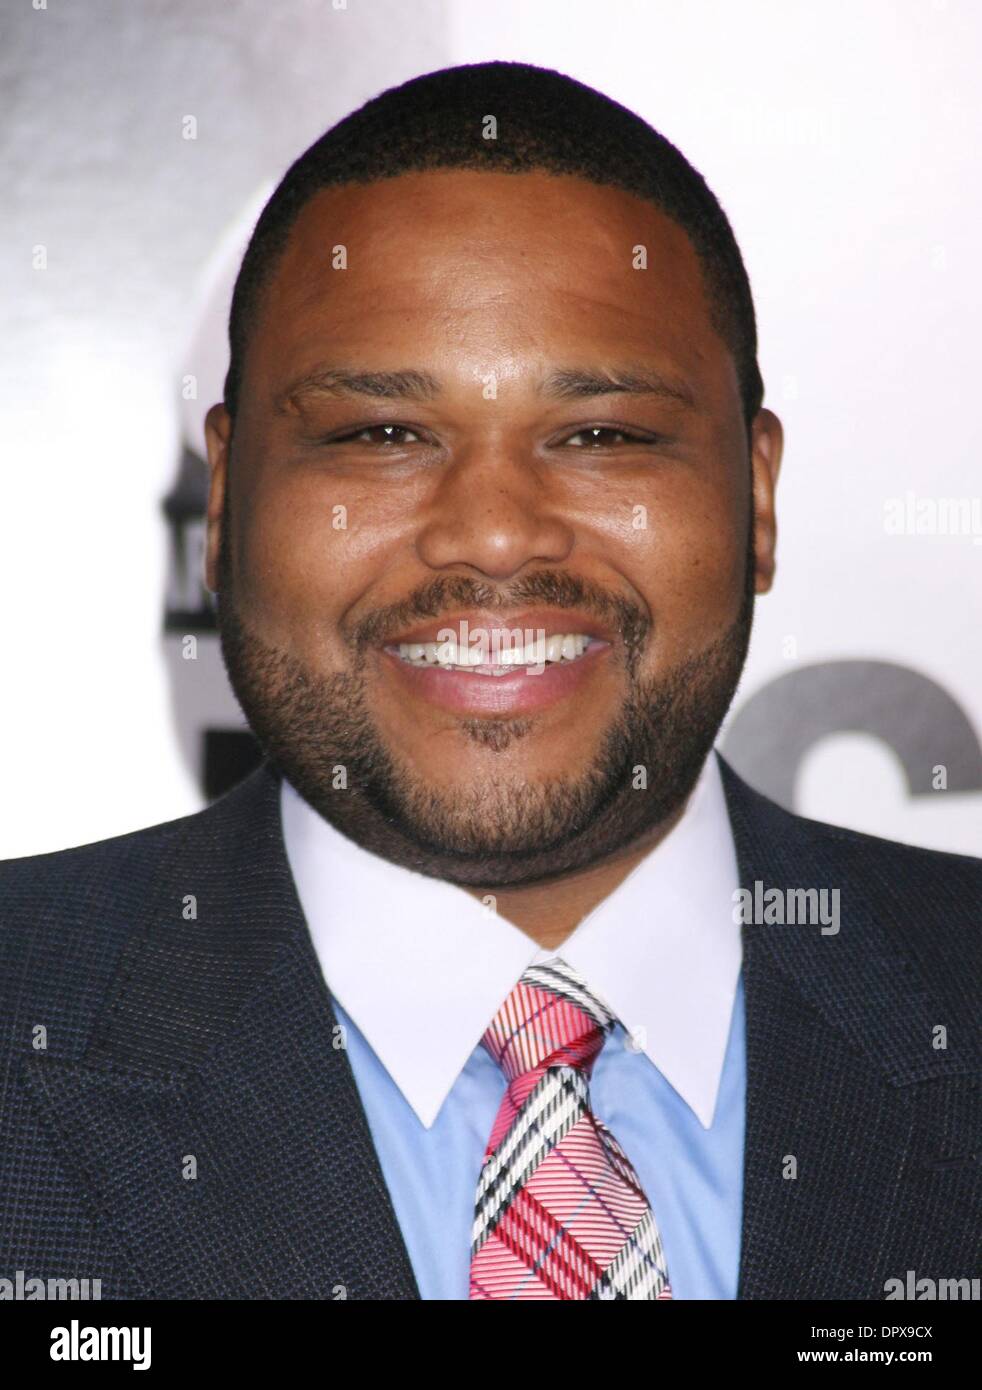 Apr 23, 2009 - New York, New York, USA - Actor ANTHONY ANDERSON at the New York premiere of 'Obsessed' held at School of Visual Arts. (Credit Image: Â© Nancy Kaszerman/ZUMA Press) Stock Photo